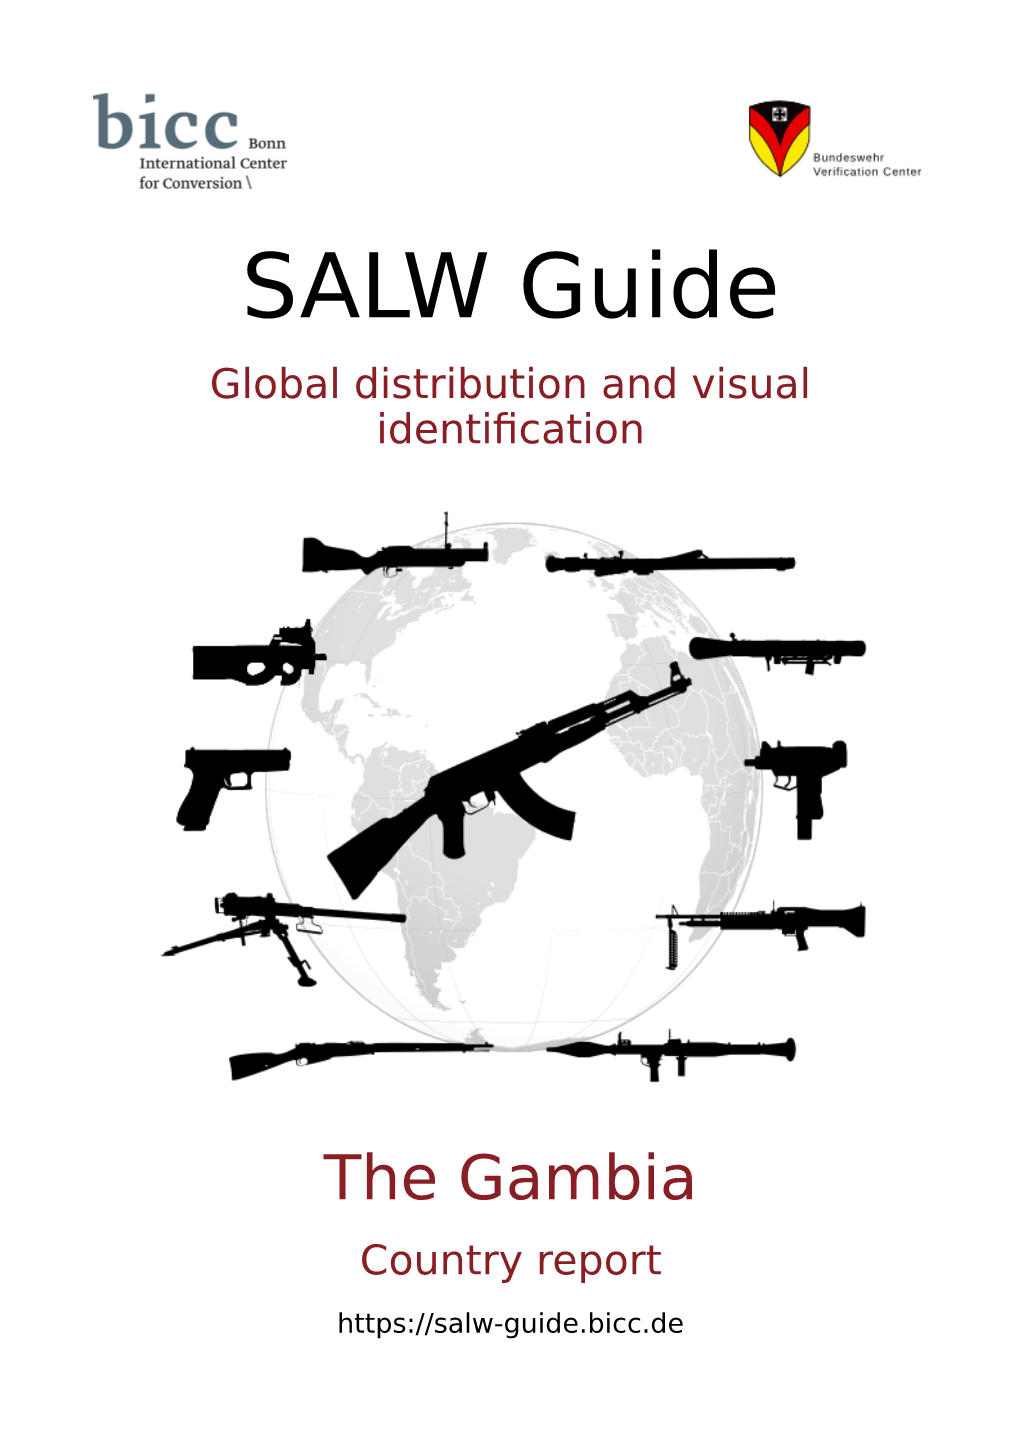 The Gambia Country Report